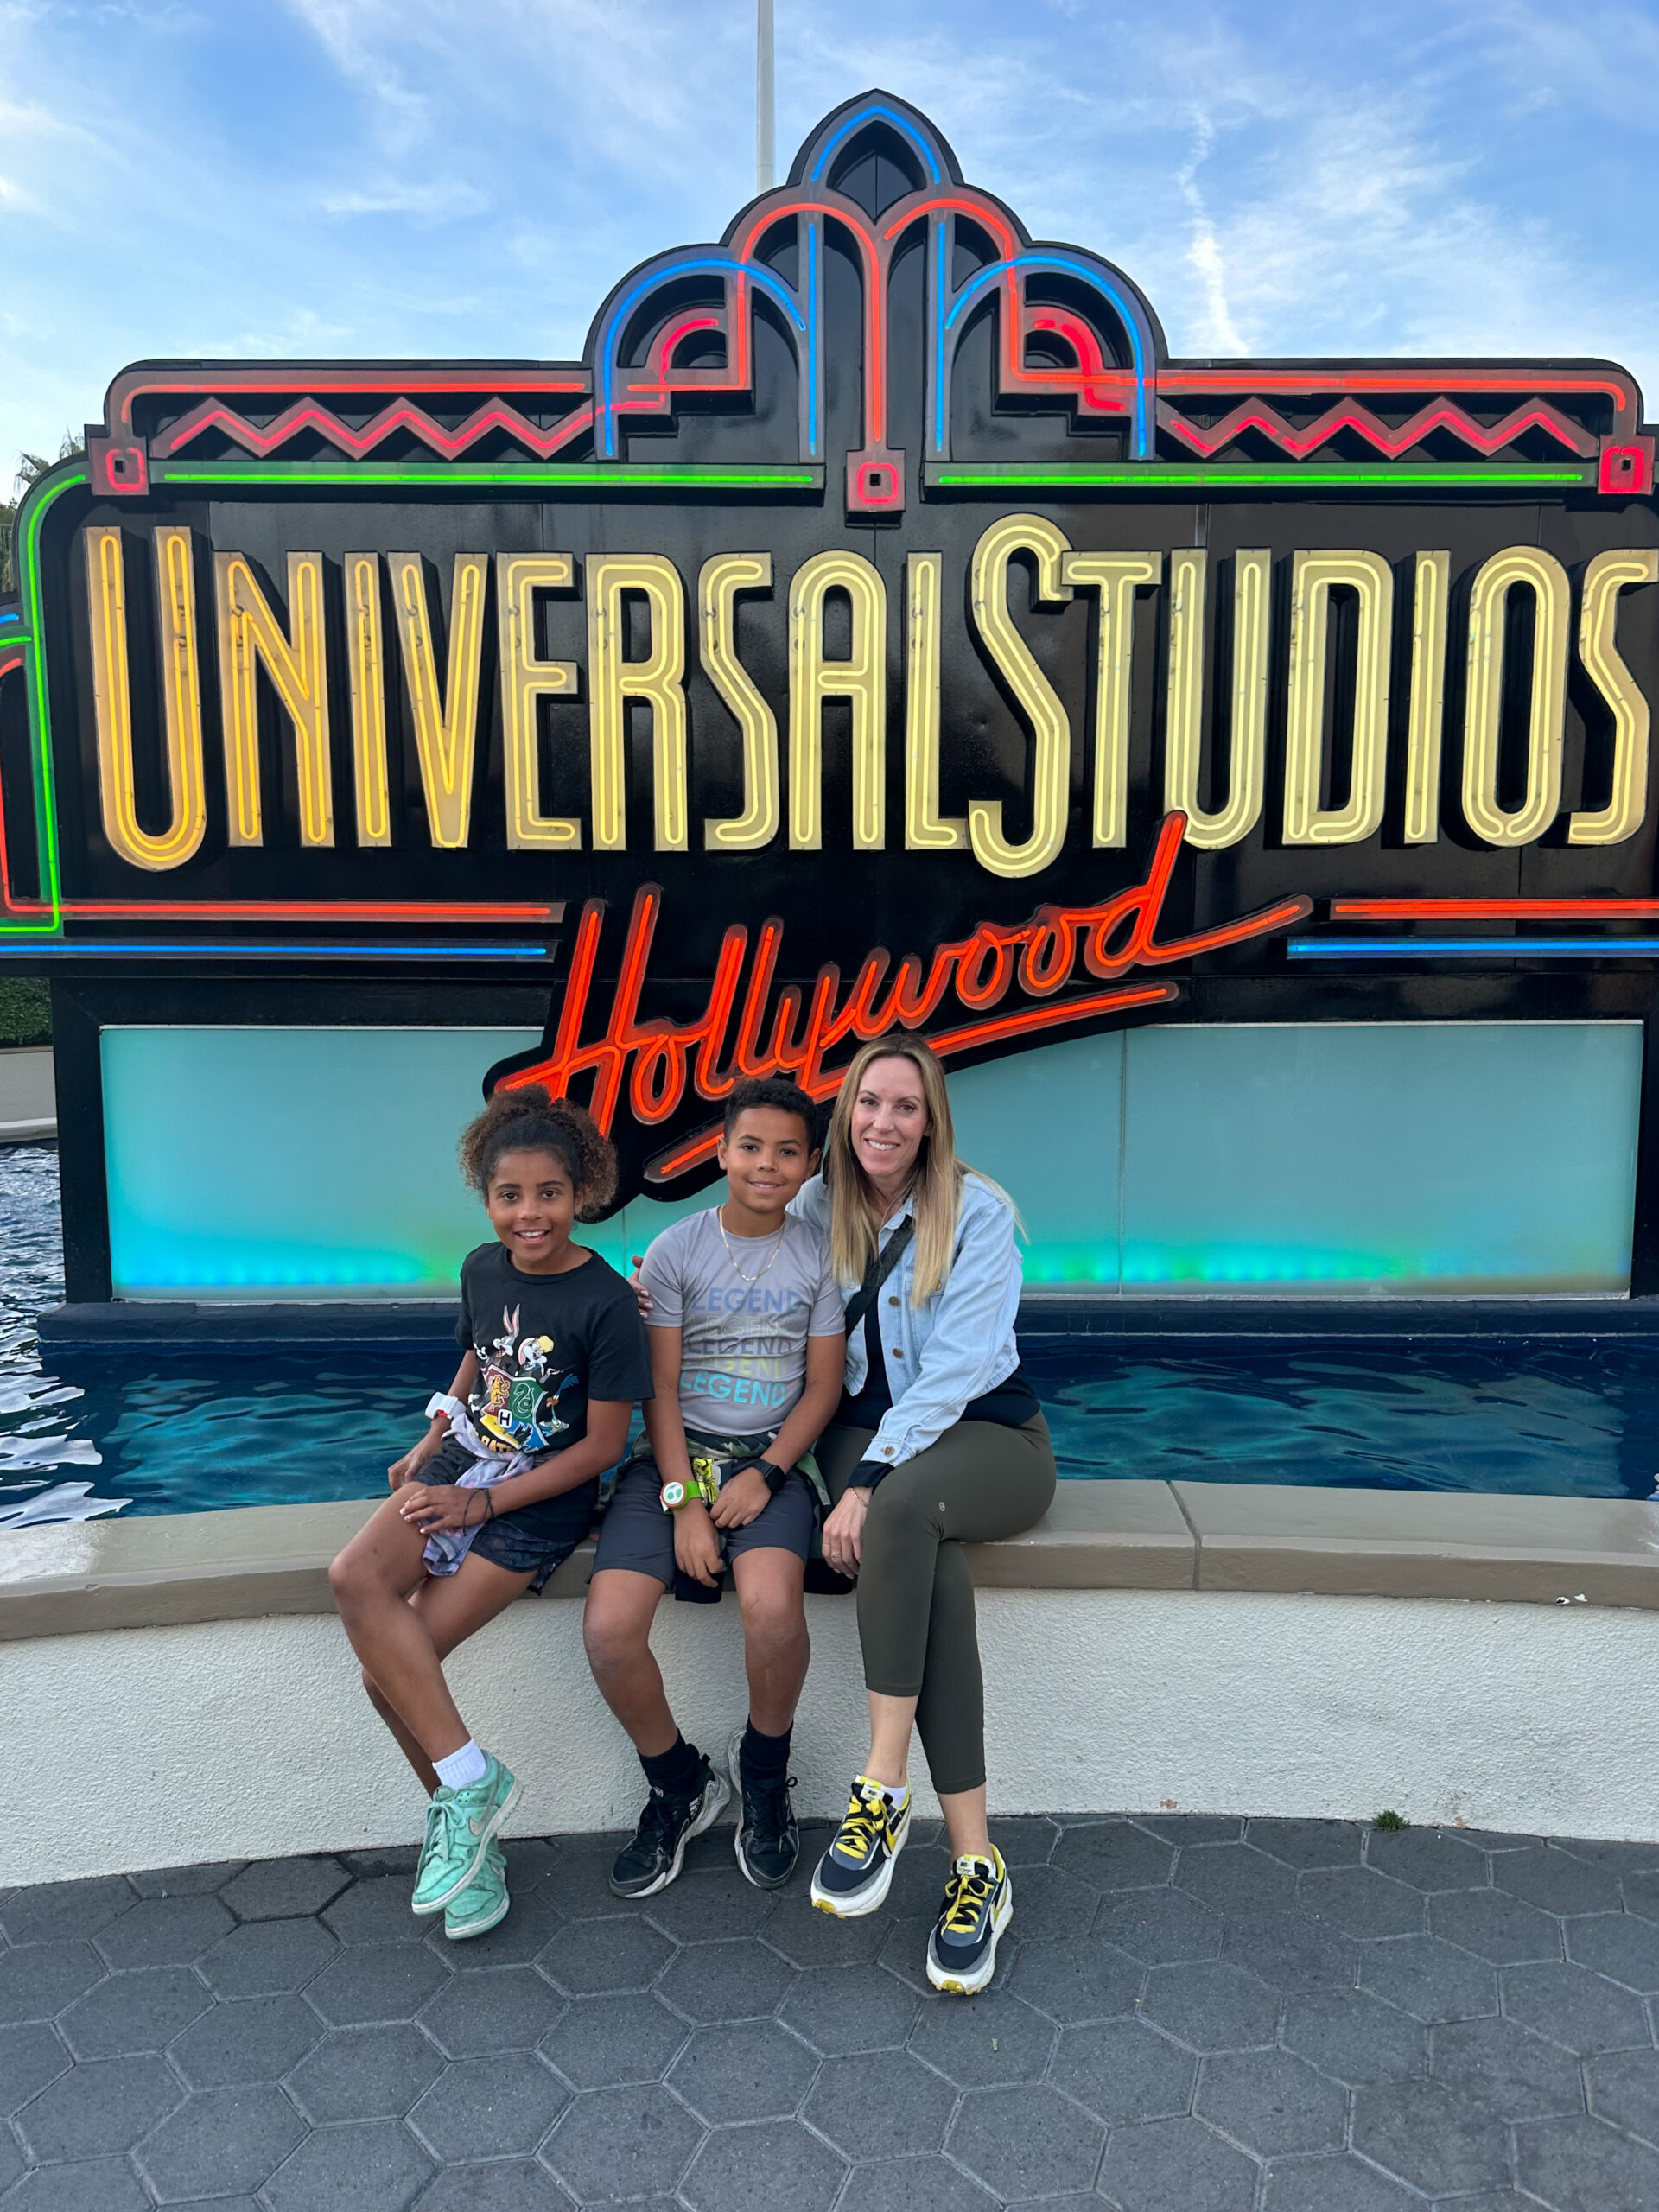 Universal Studios Hollywood: Everything You Need to Know